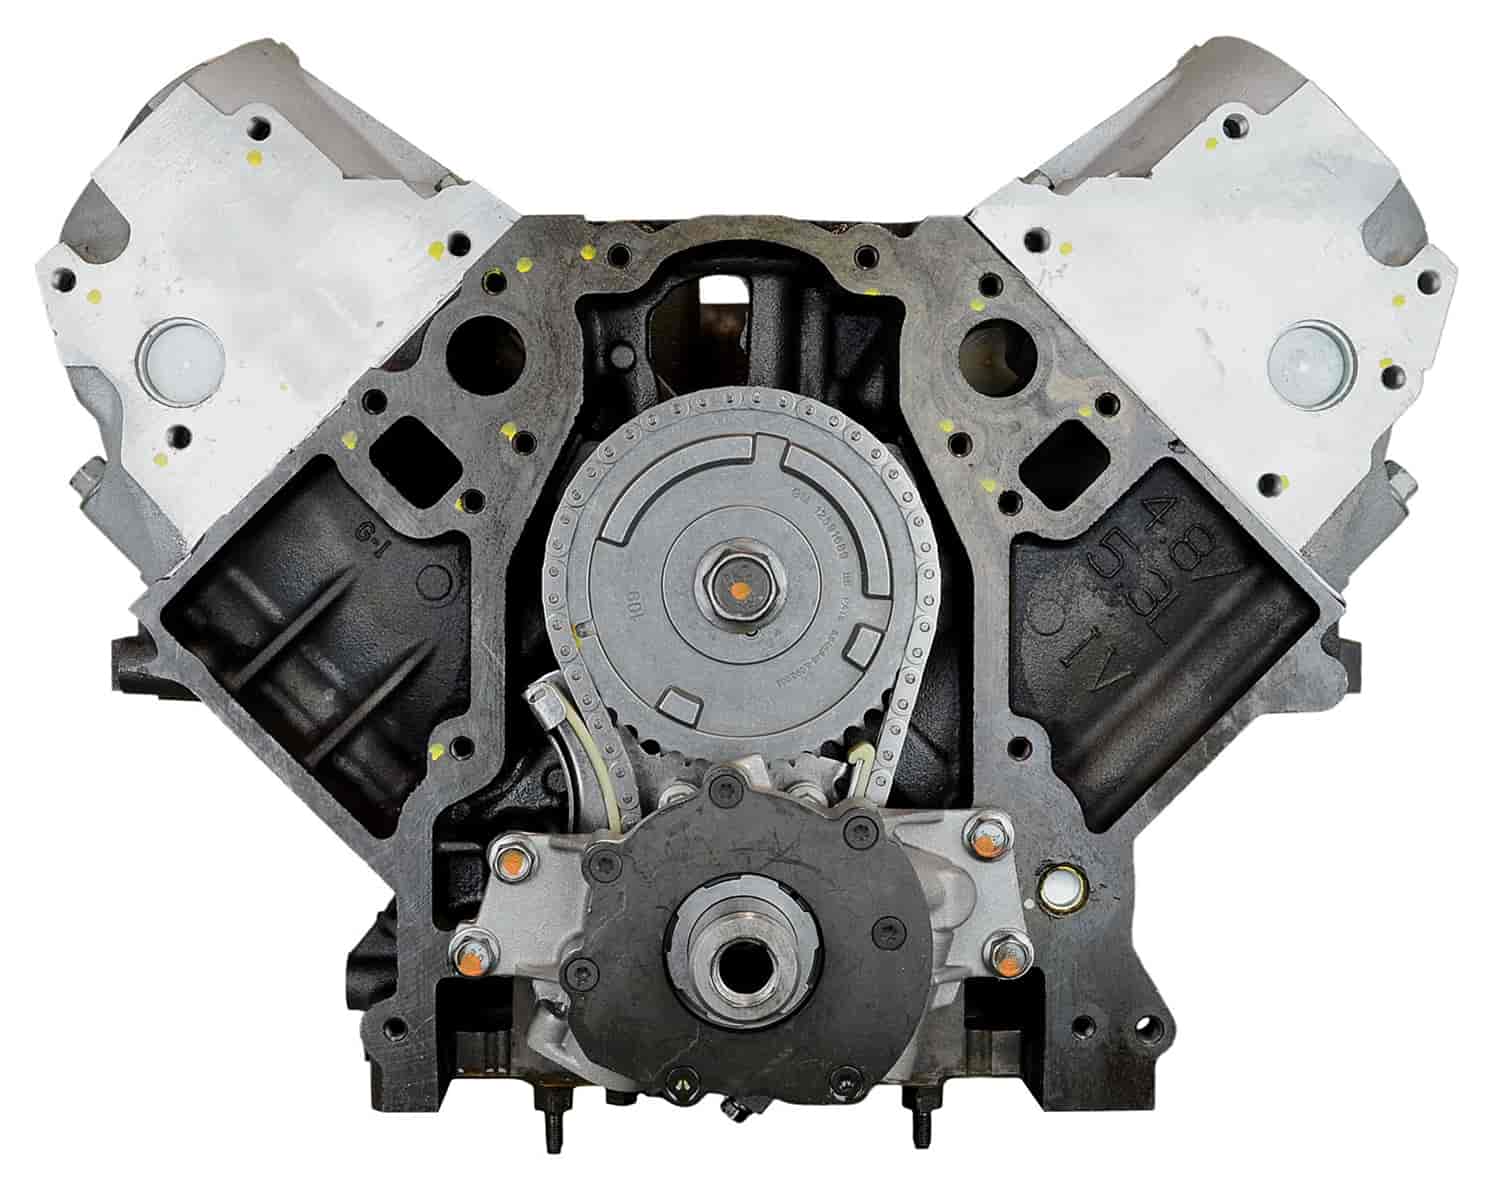 Remanufactured Crate Engine for 2008-2009 Chevy/GMC Van with